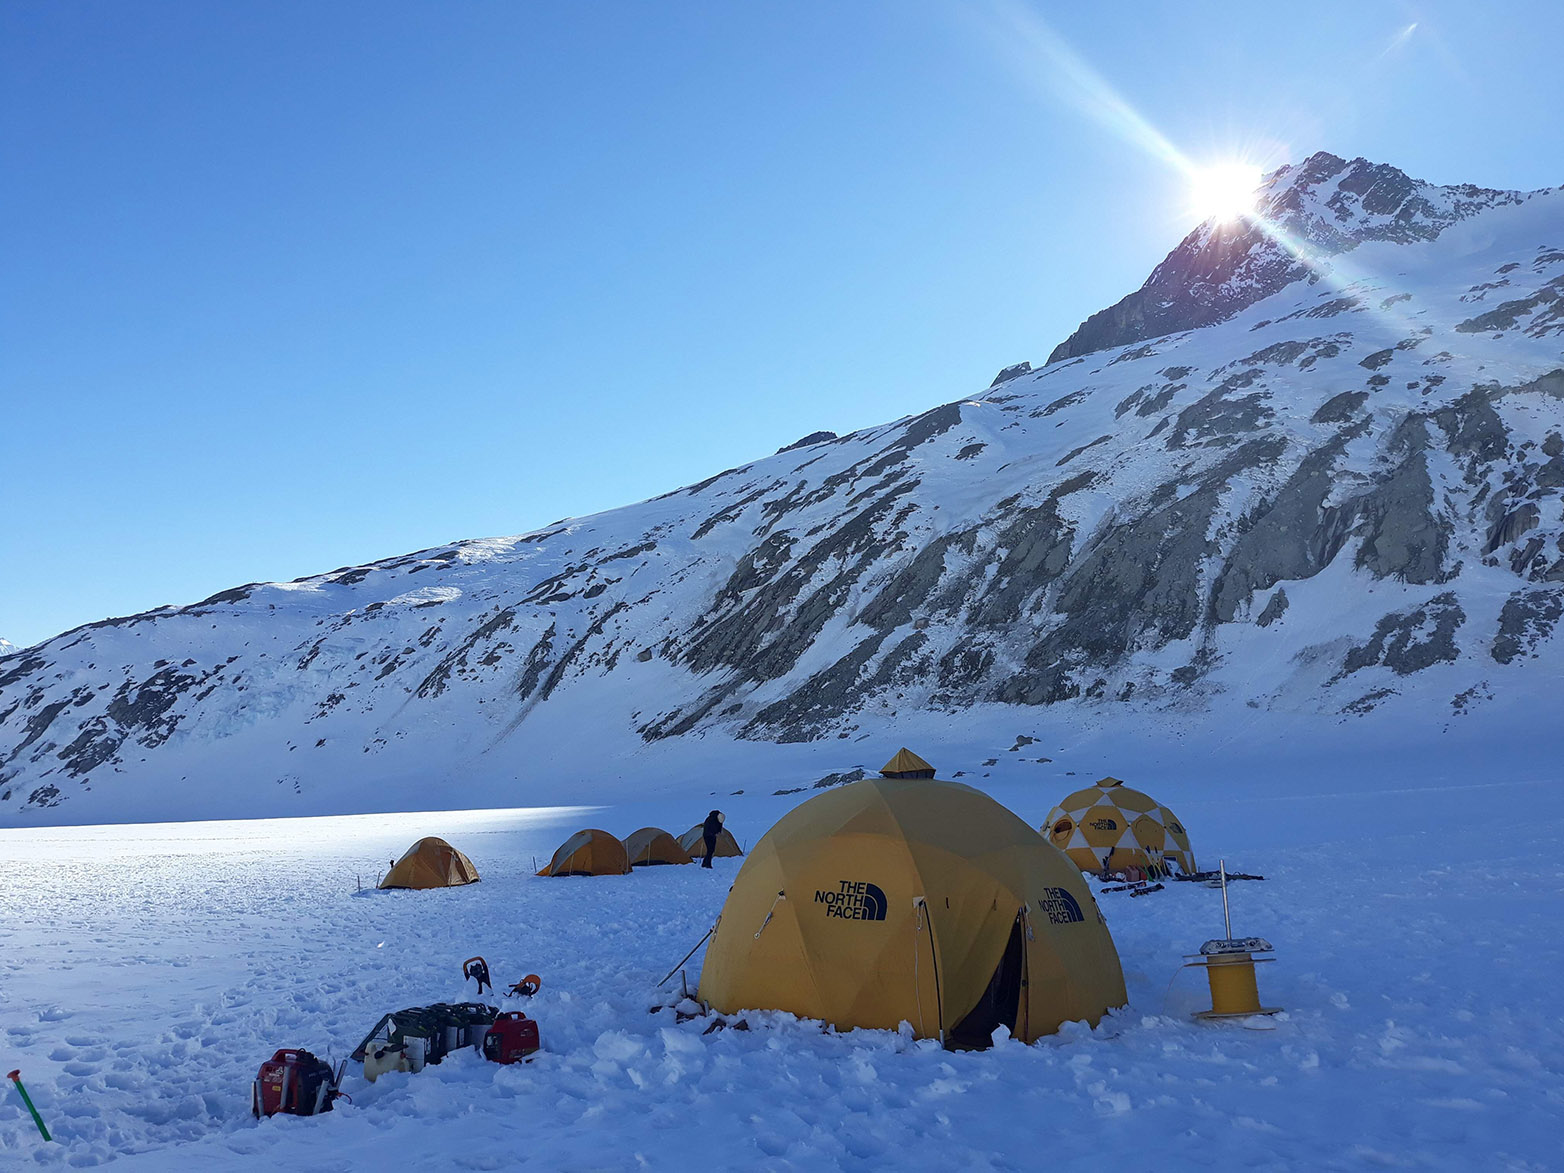 Enlarged view: In order to test their new method, the researchers lived in a base camp on the glacier for several days.